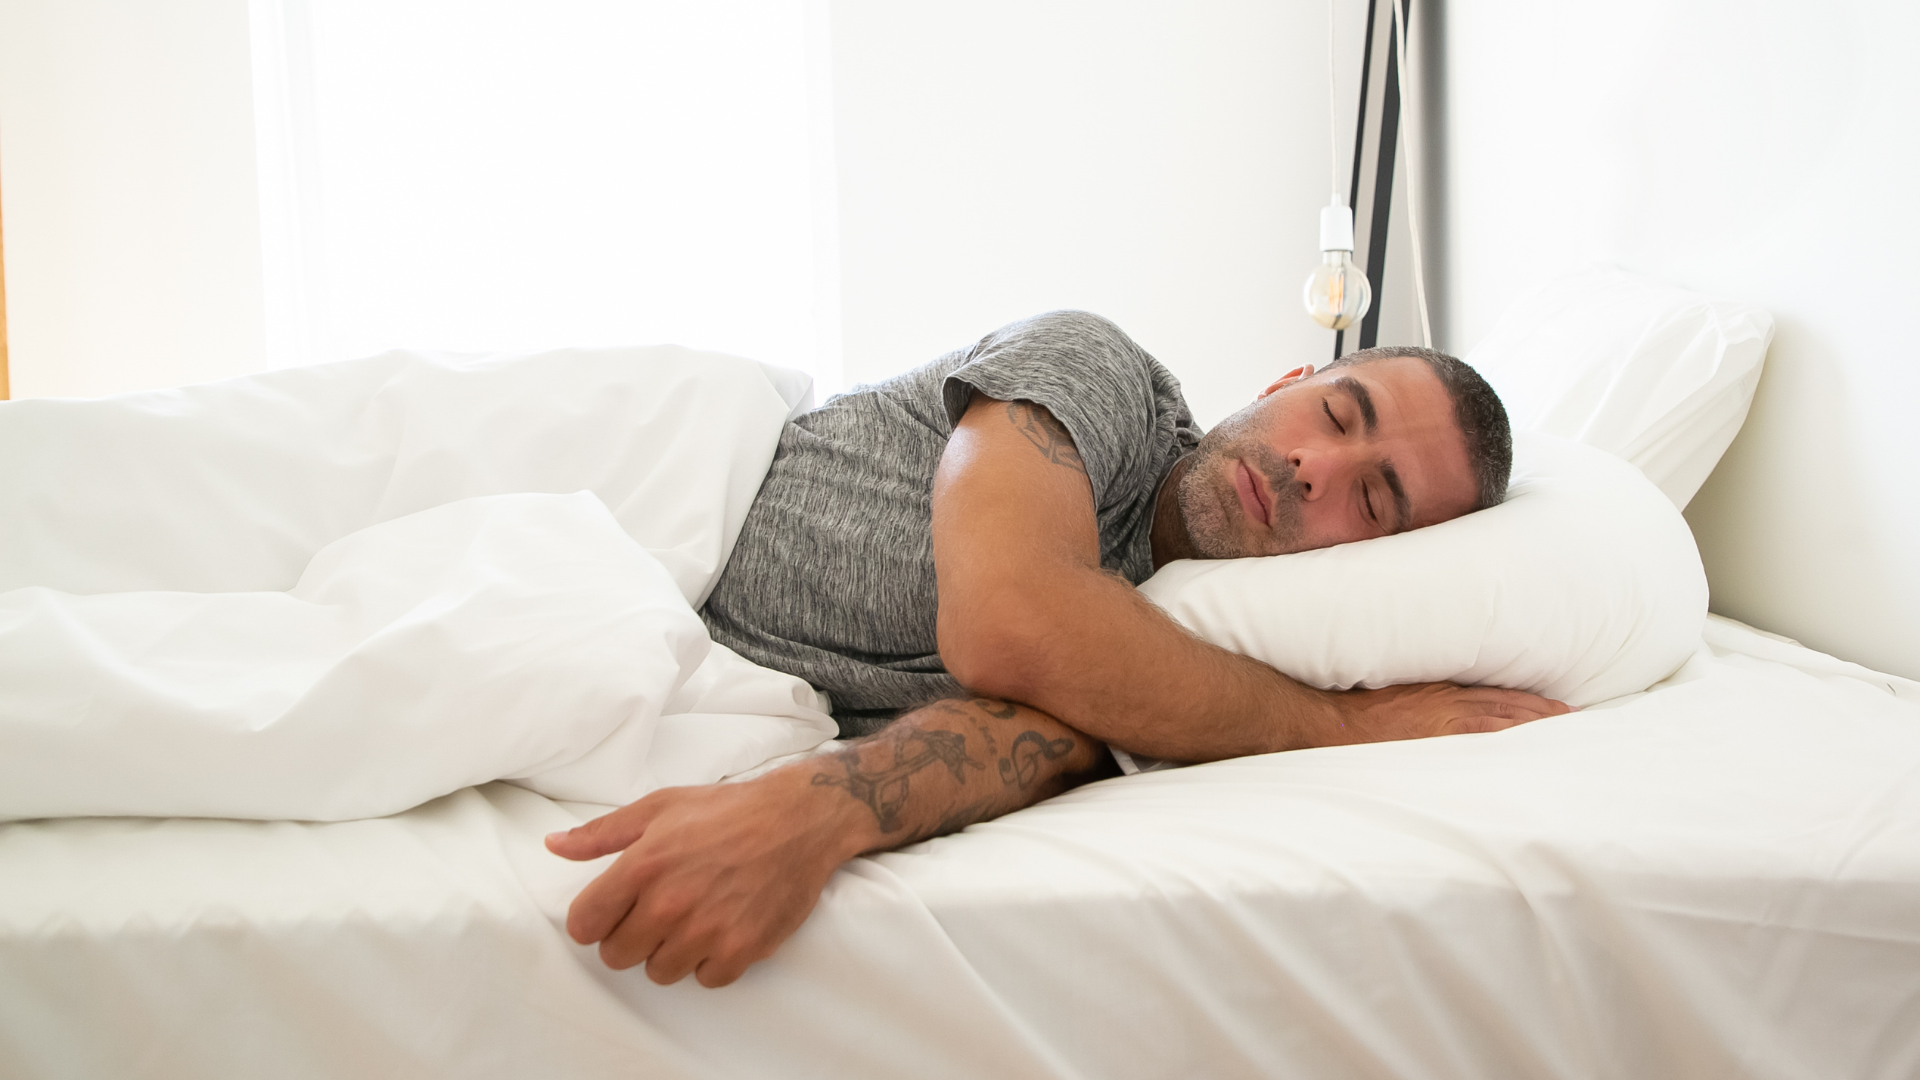 7 Home Remedies for Snoring to Help You Sleep Soundly